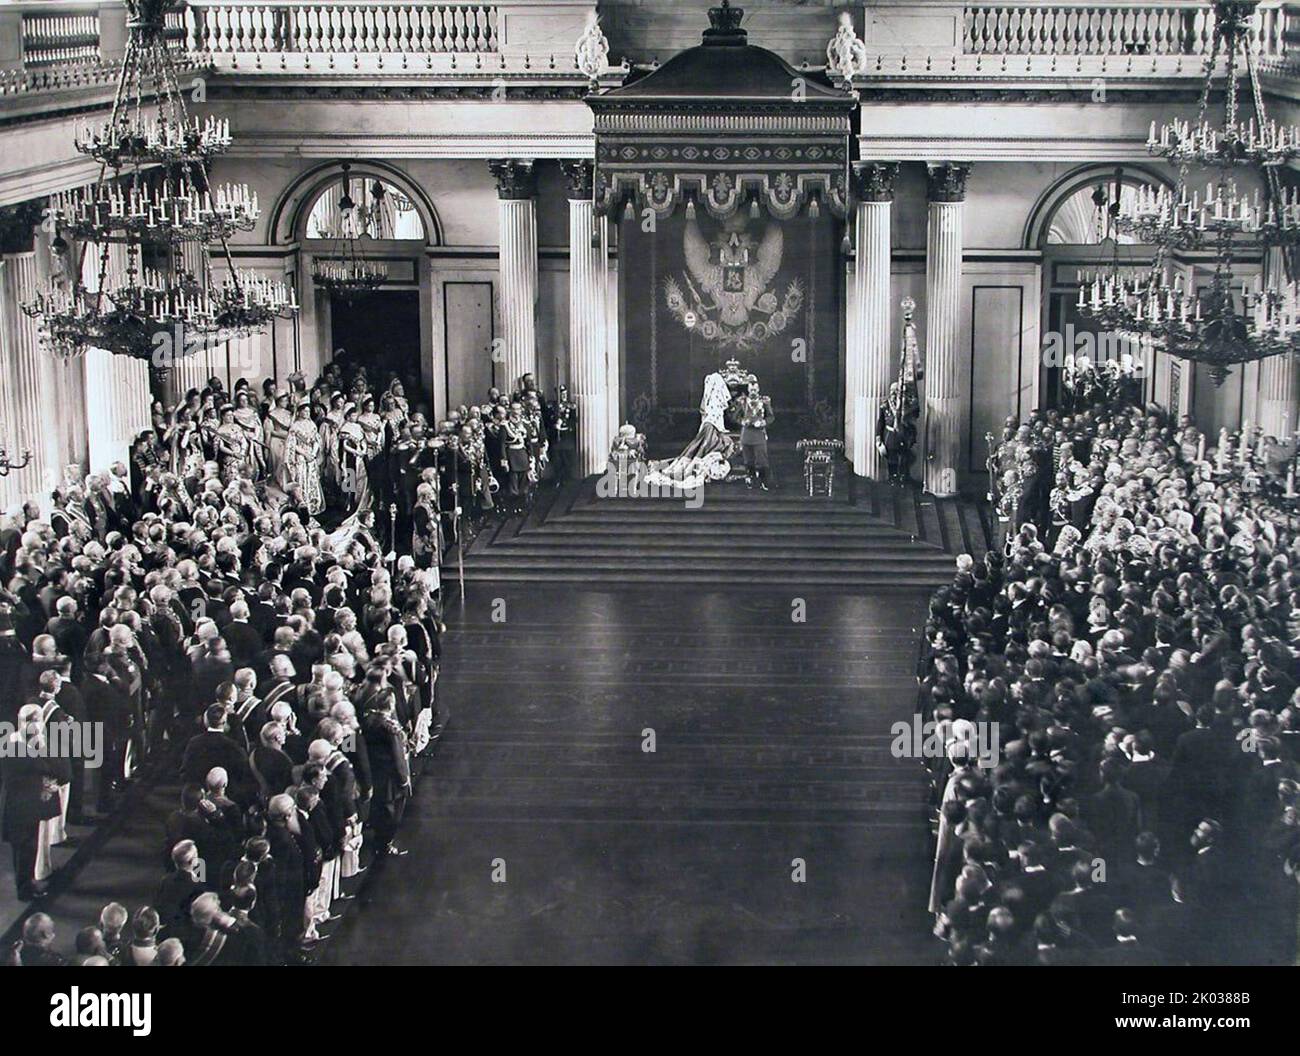 Tsar Nicholas II's opening speech before the two chambers of the State Duma in the Winter Palace. 1906. Stock Photo